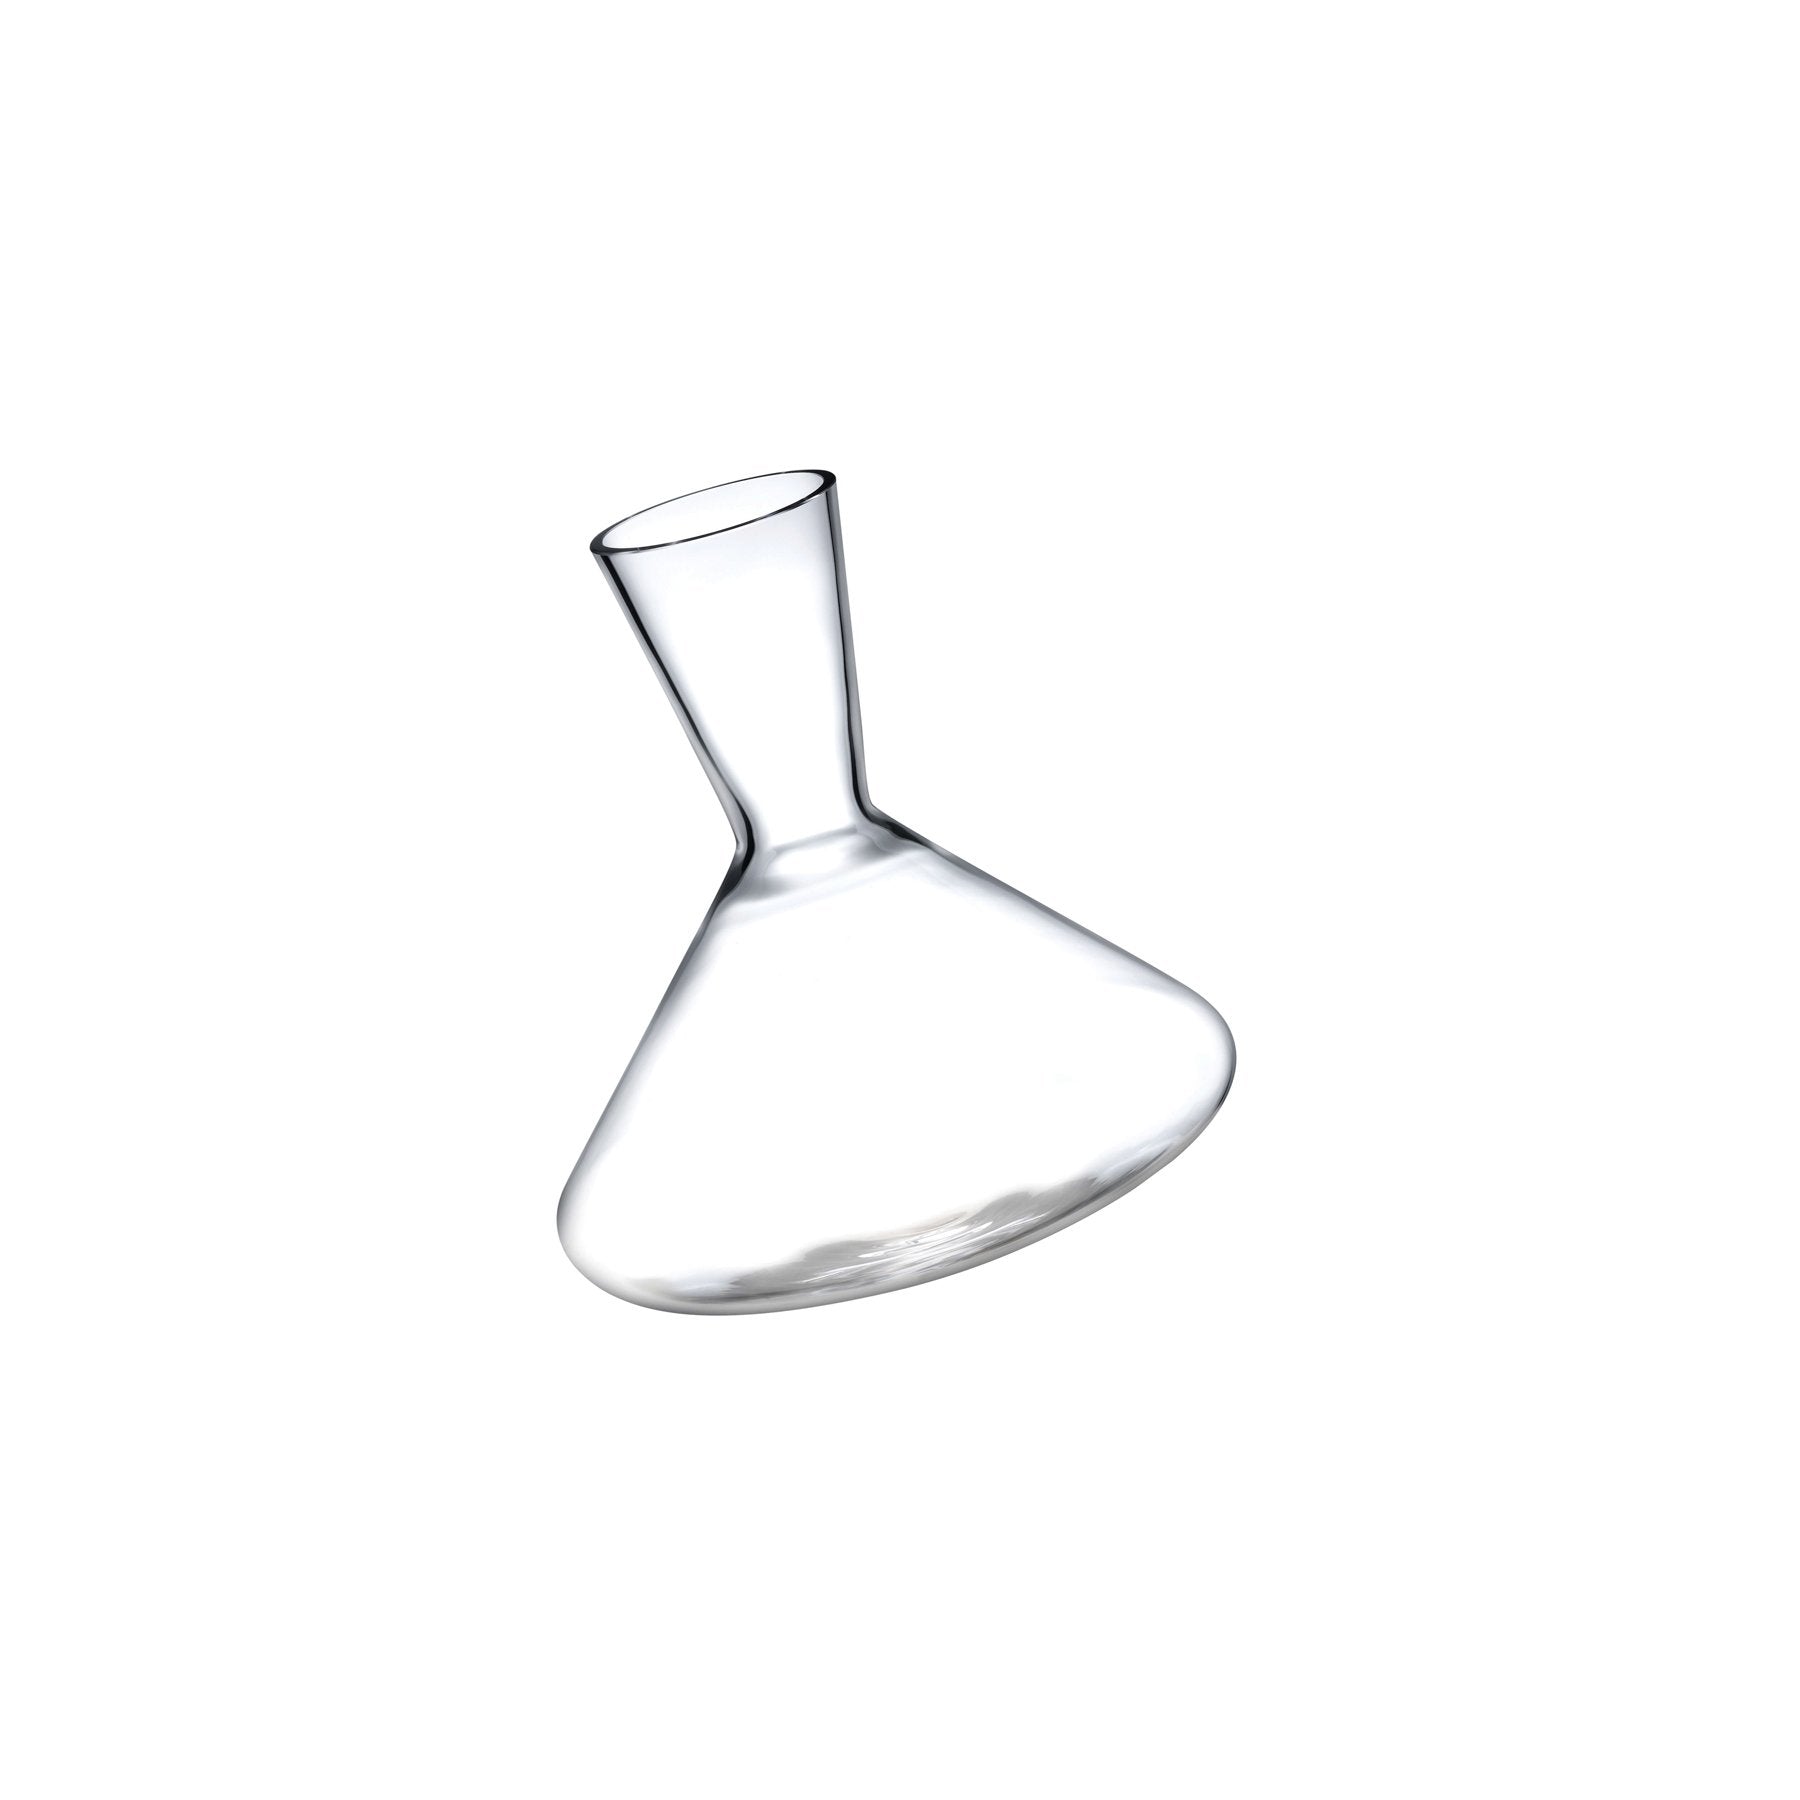 balance wine decanter by nude at adorn.house 